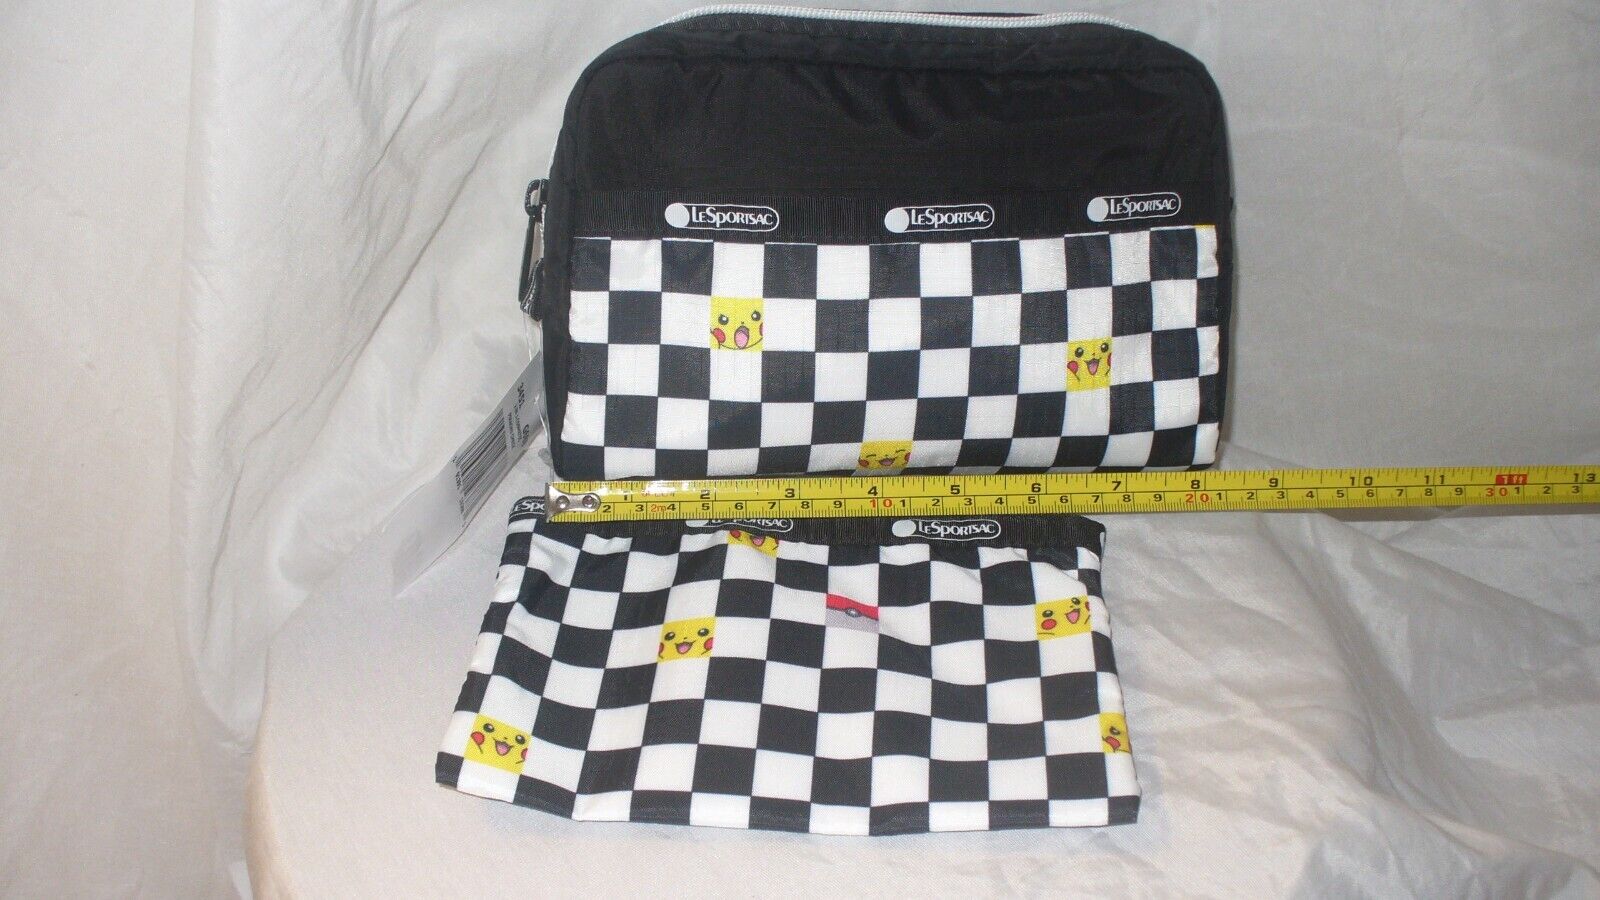 Lesportsac Pikachu Check 2 In 1 Cosmetic Pouches New With Tags Pokemon 3451 G688